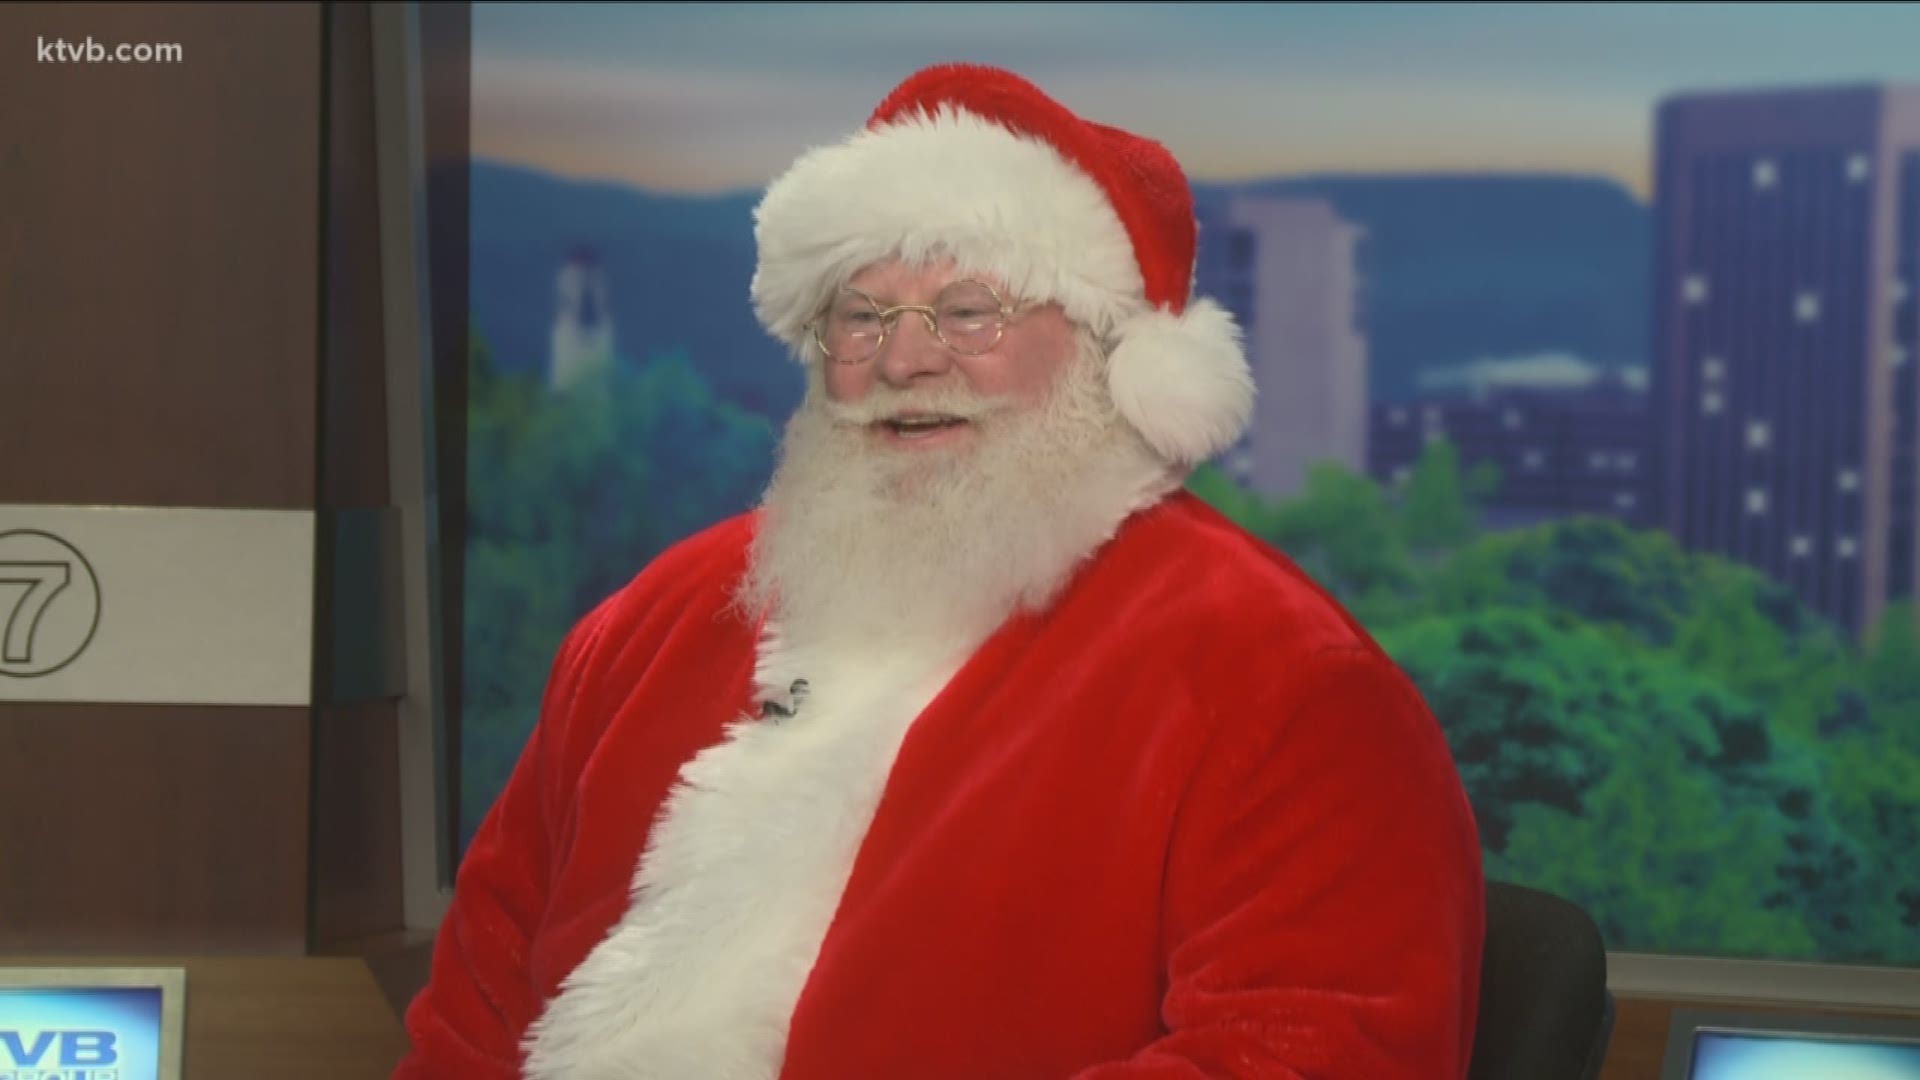 Santa took time from his busy schedule to drop by the News at Four.